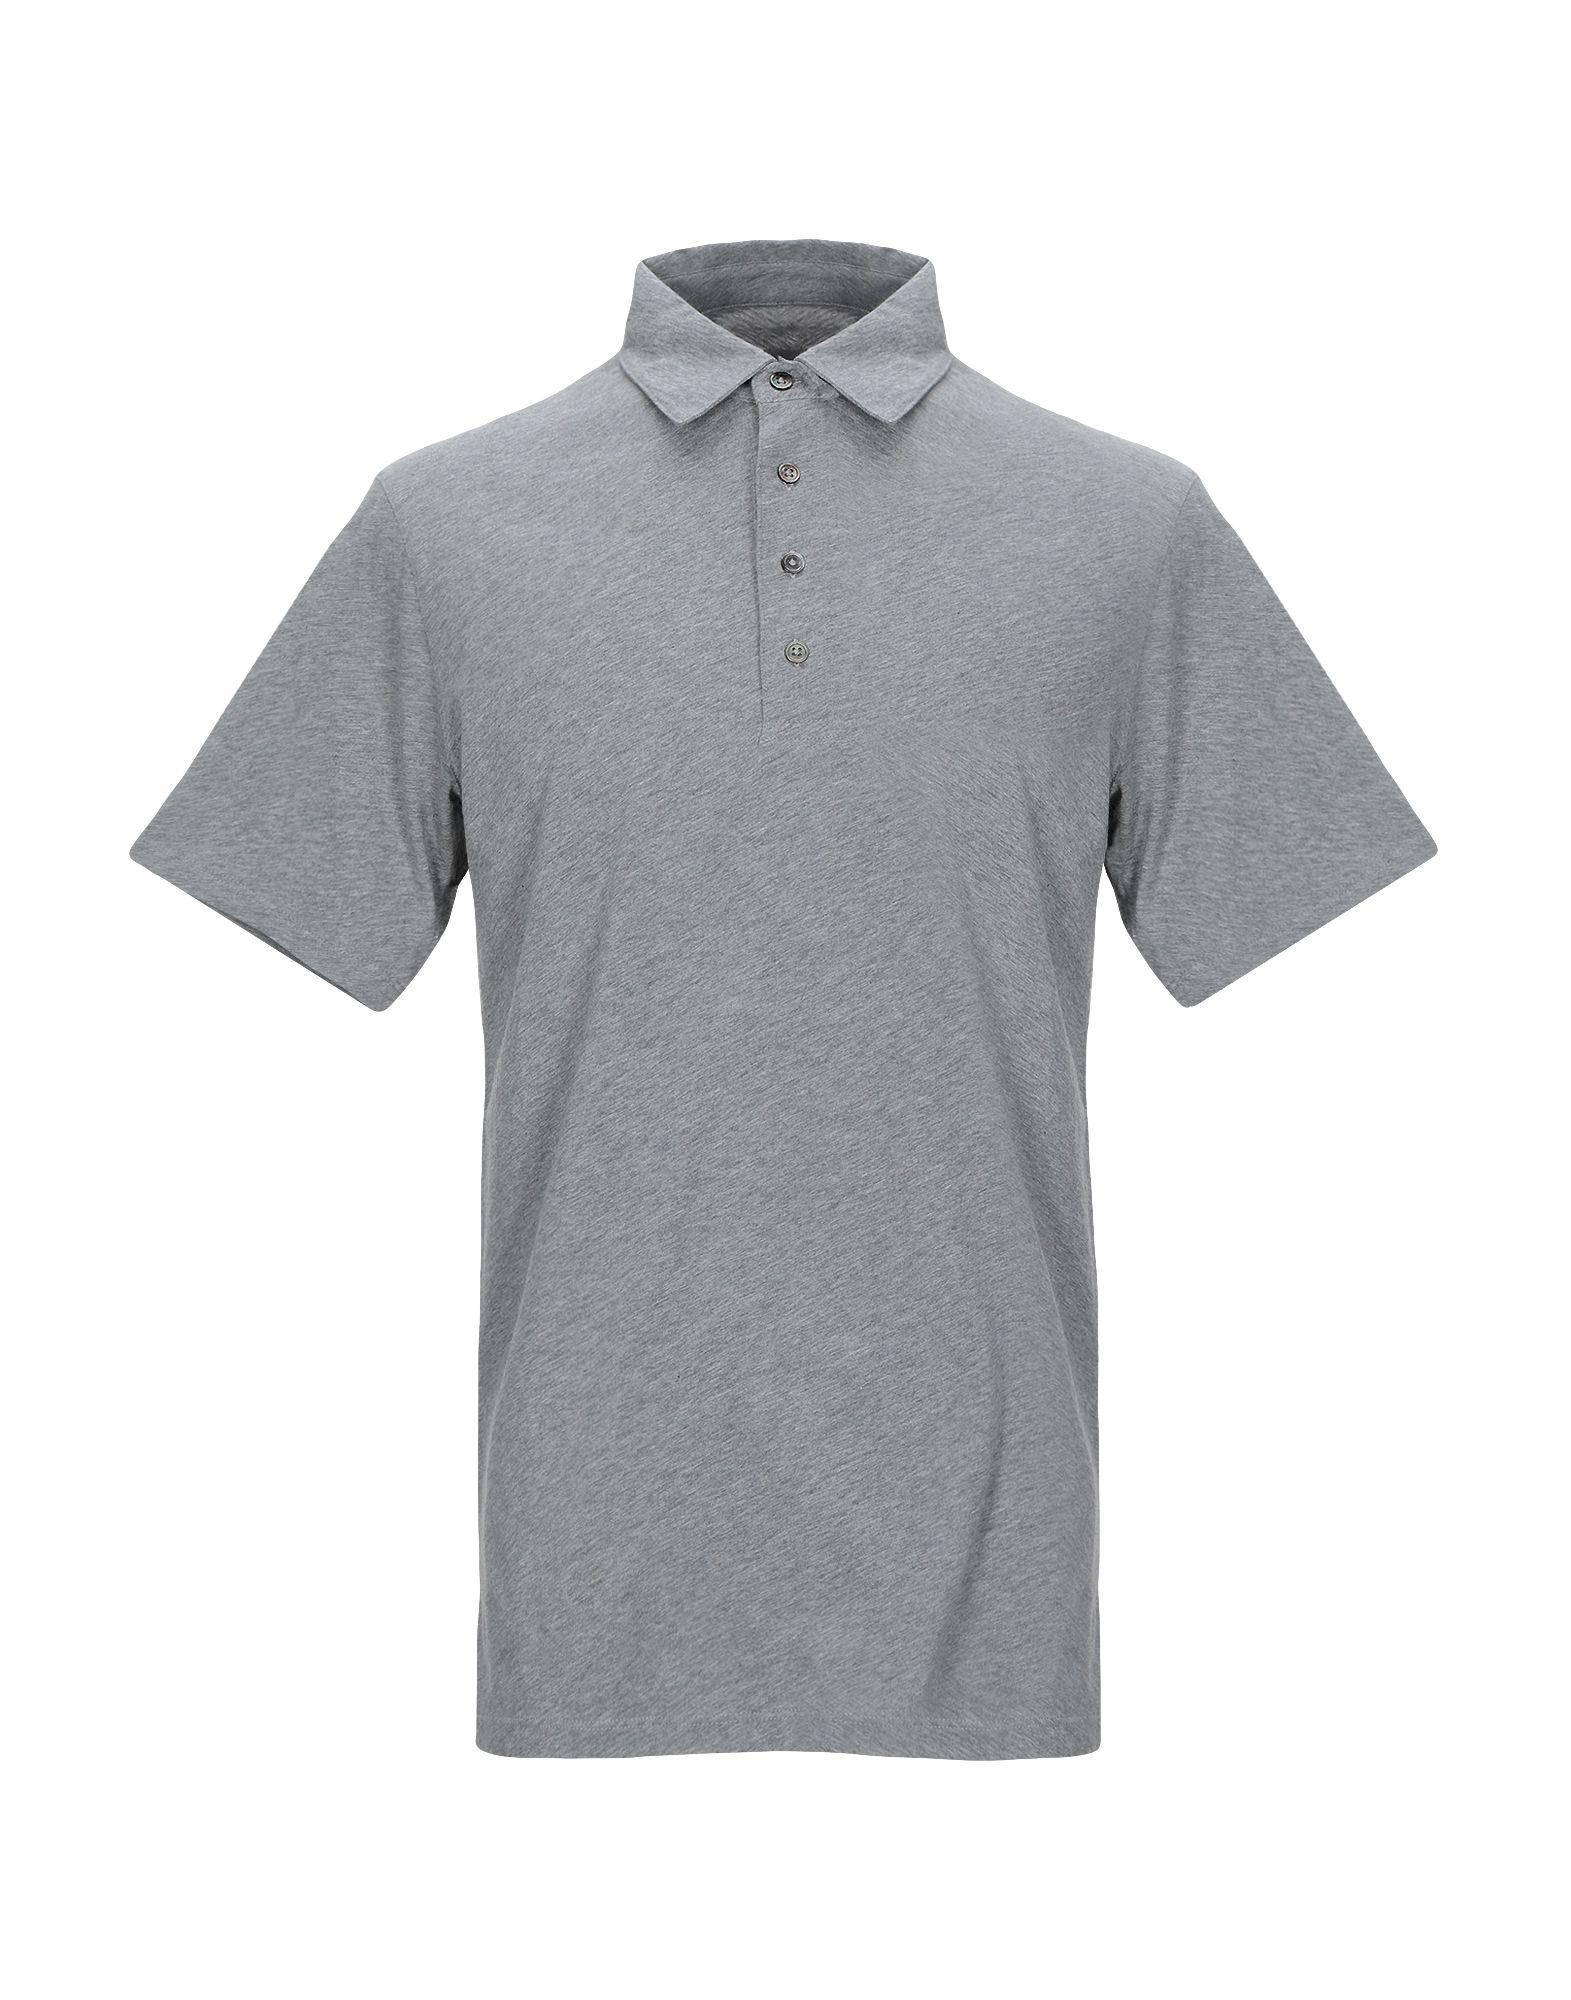 Department 5 Polo Shirt in Grey (Gray) for Men - Lyst